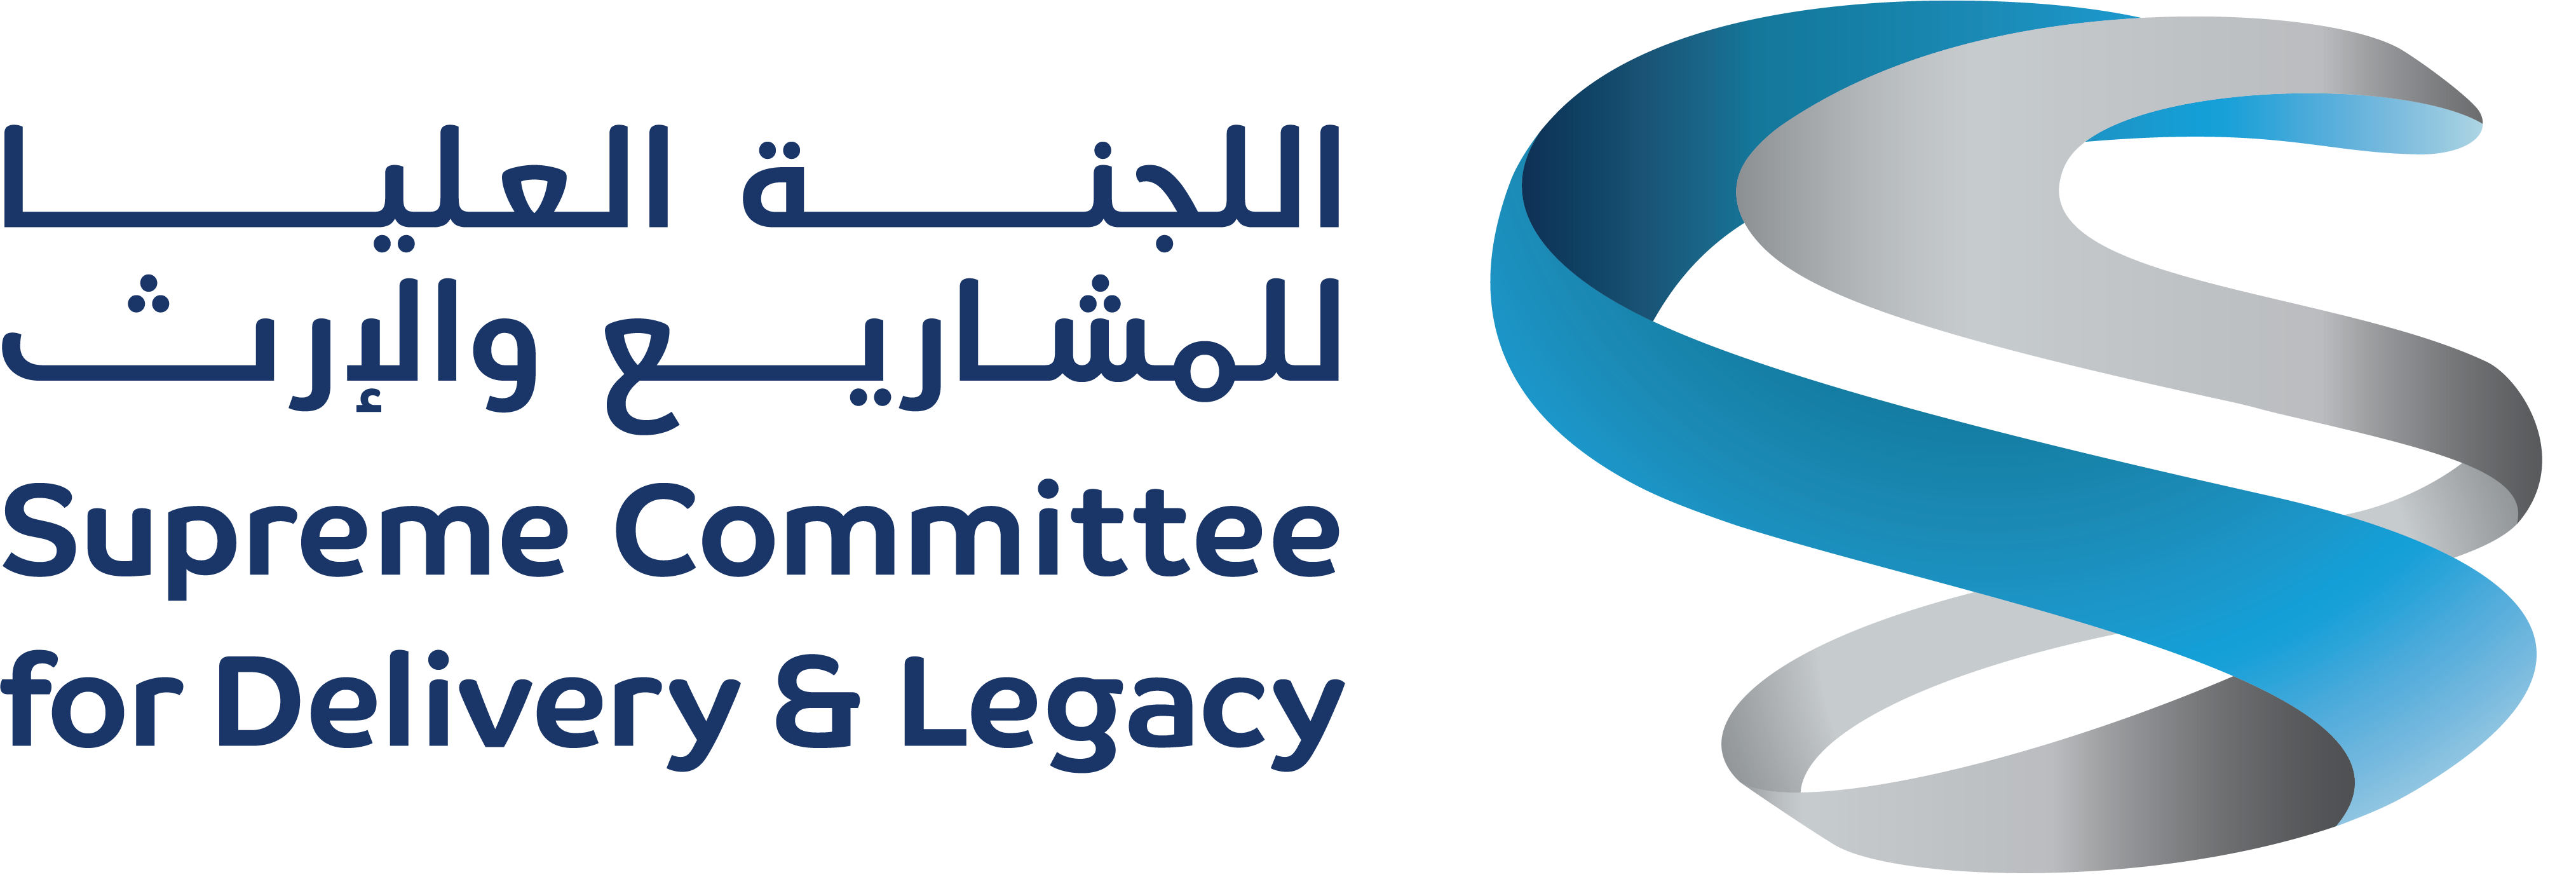 Qatar 2022 Supreme Committee for Delivery and Legacy